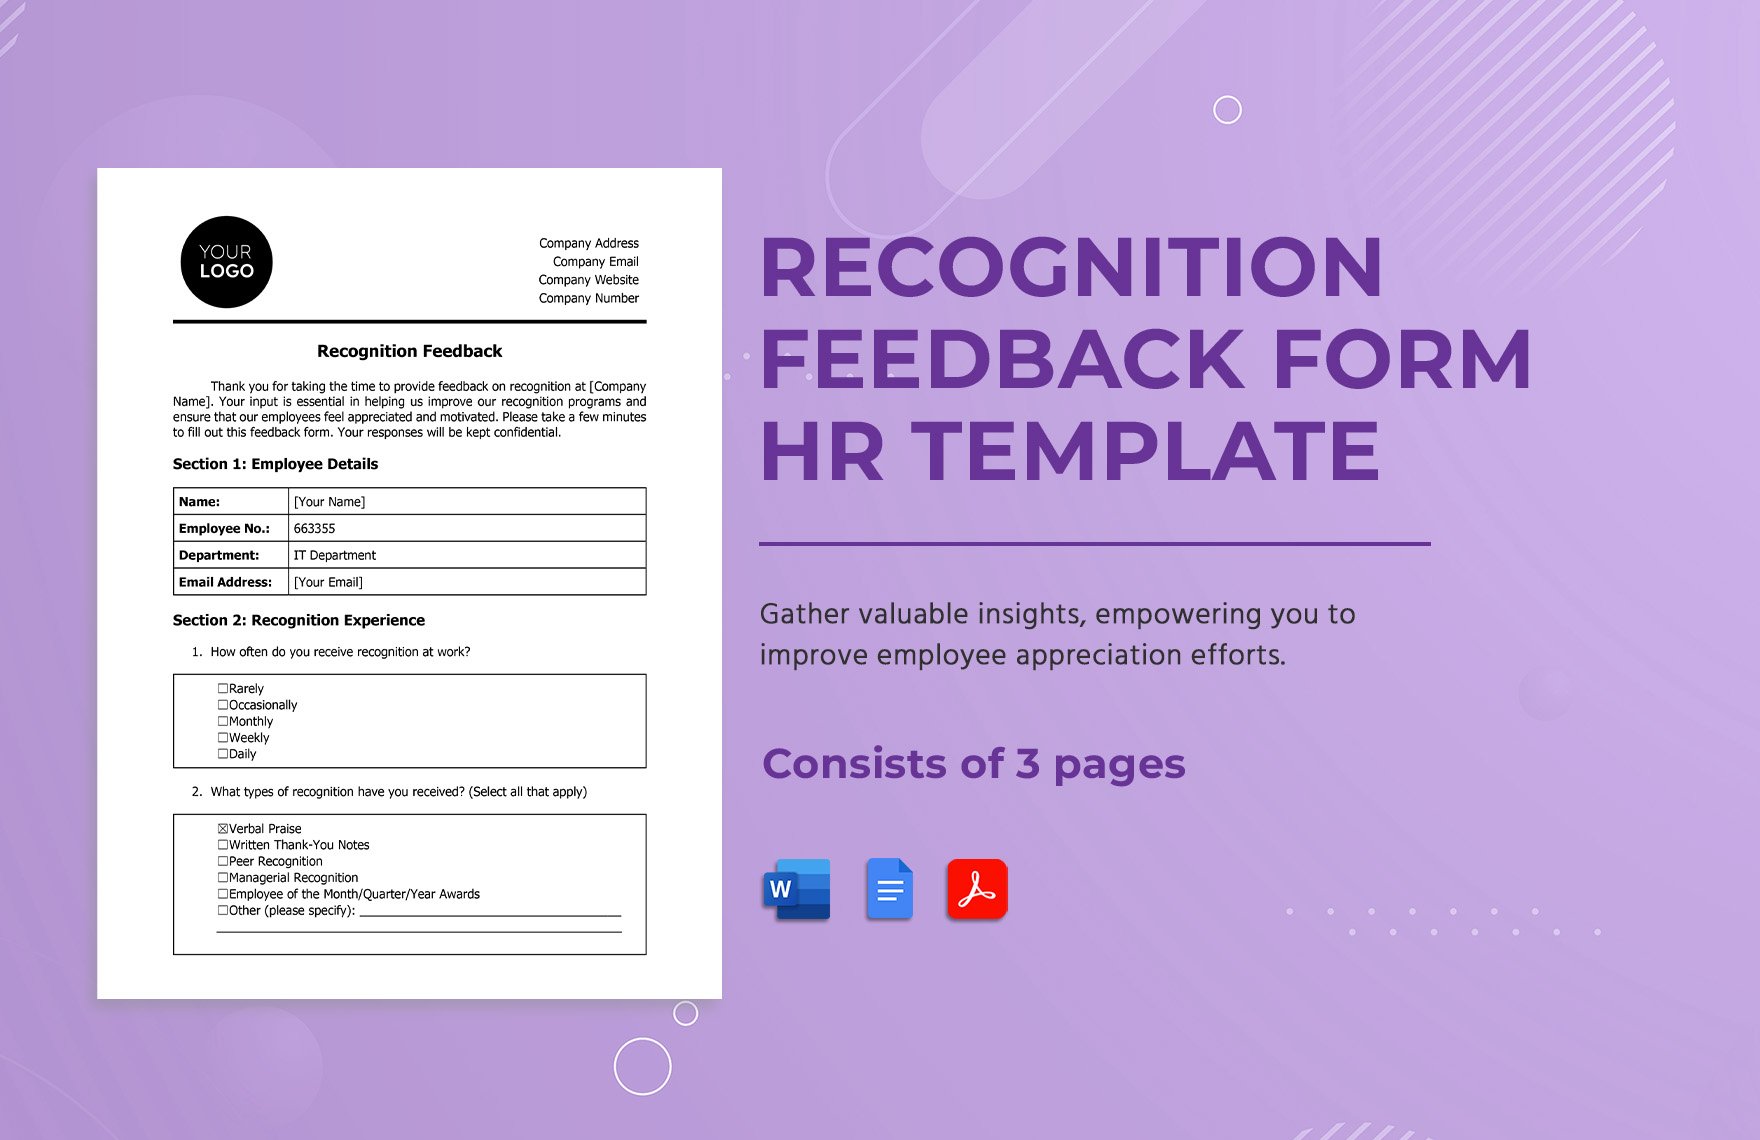 Recognition Feedback Form HR Template